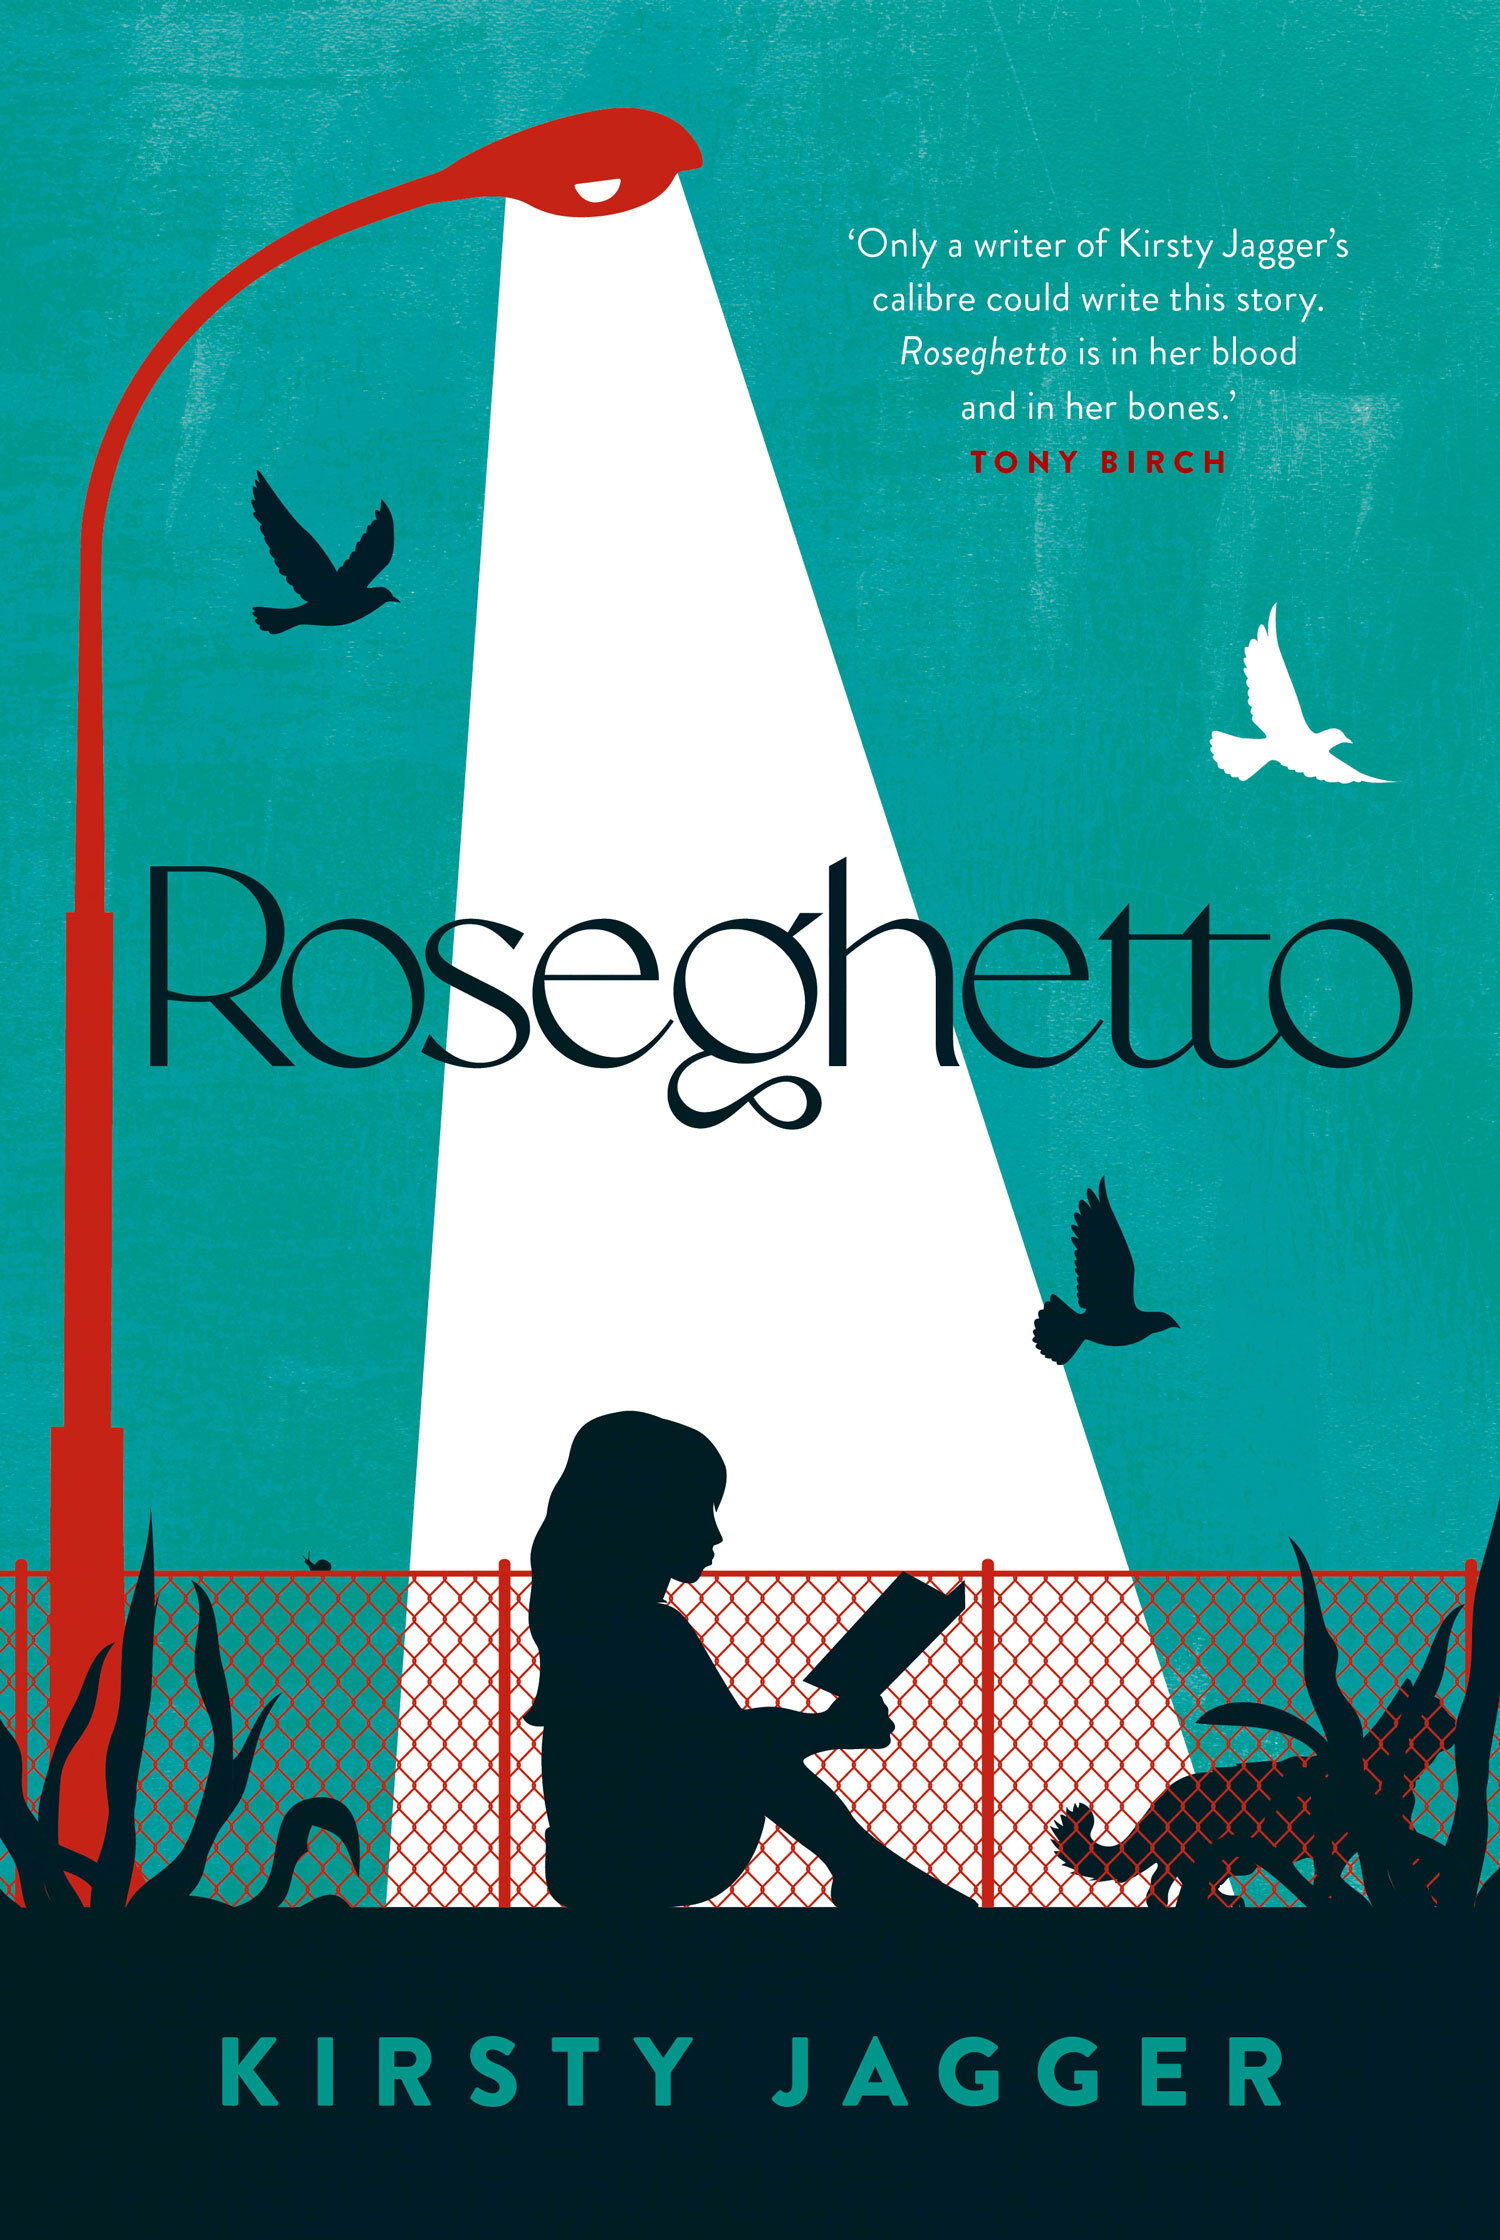 Cover of Roseghetto by Kirsty Jagger. A teal and white illustration shows a girl reading a book under a street light.